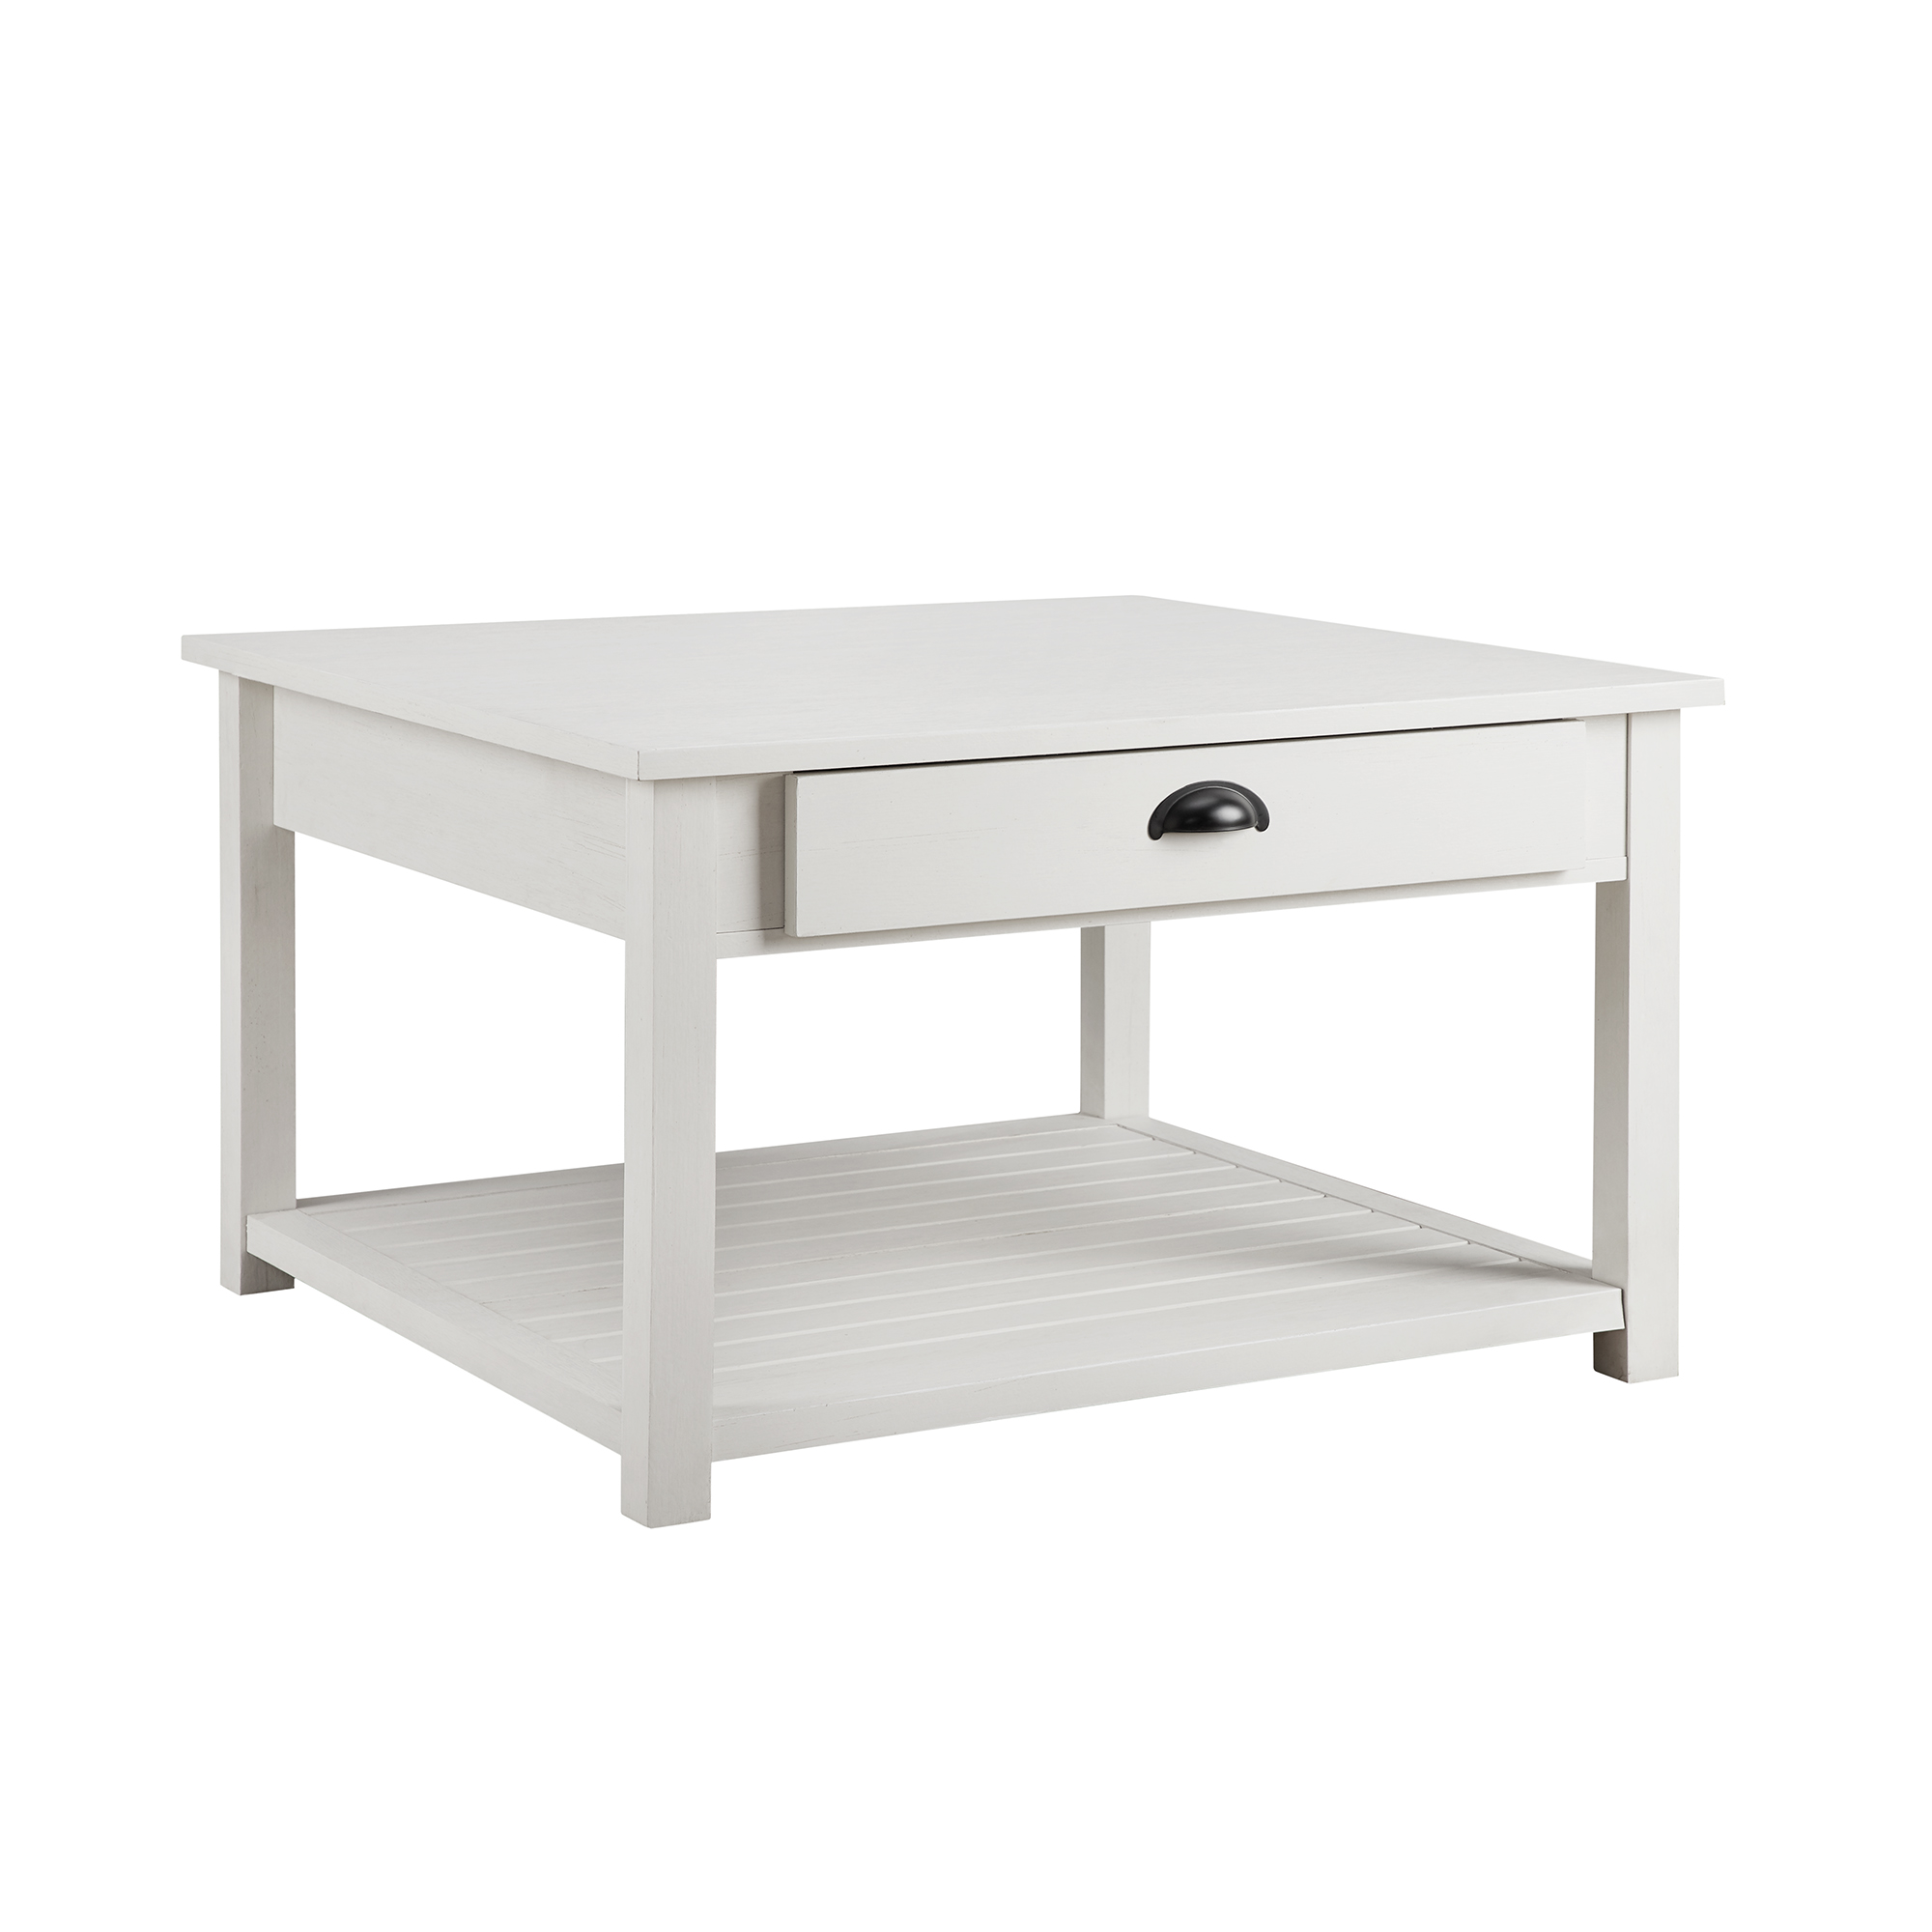 Manor Park 30 inch Square Country Coffee Table, Brushed White - image 8 of 10